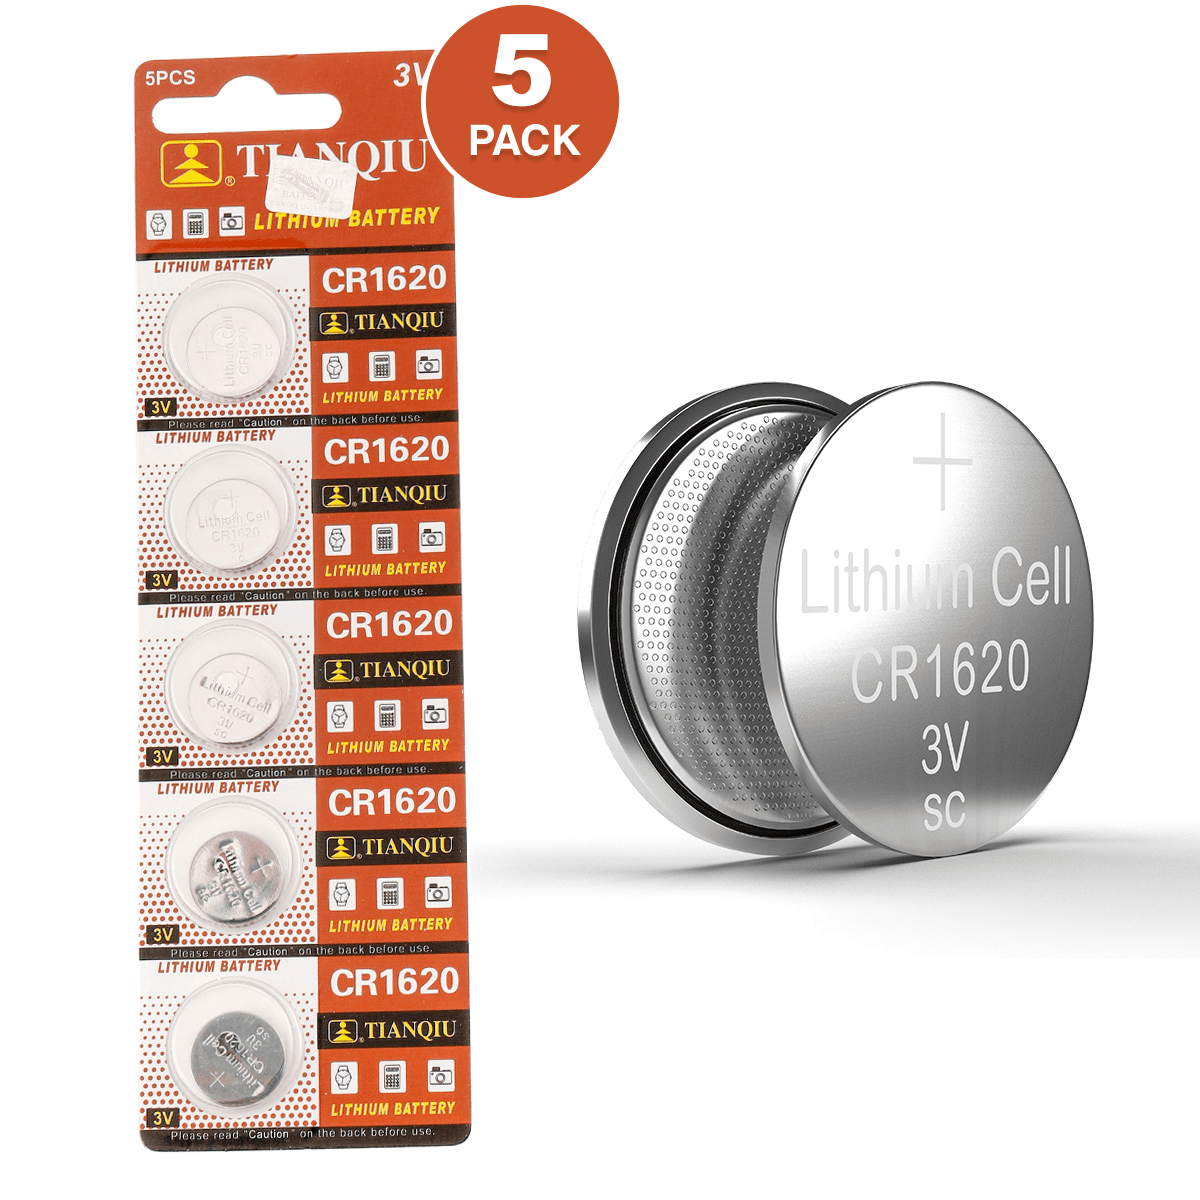 Tianqiu CR1620 3V Lithium Coin Cell Batteries (5 Batteries)